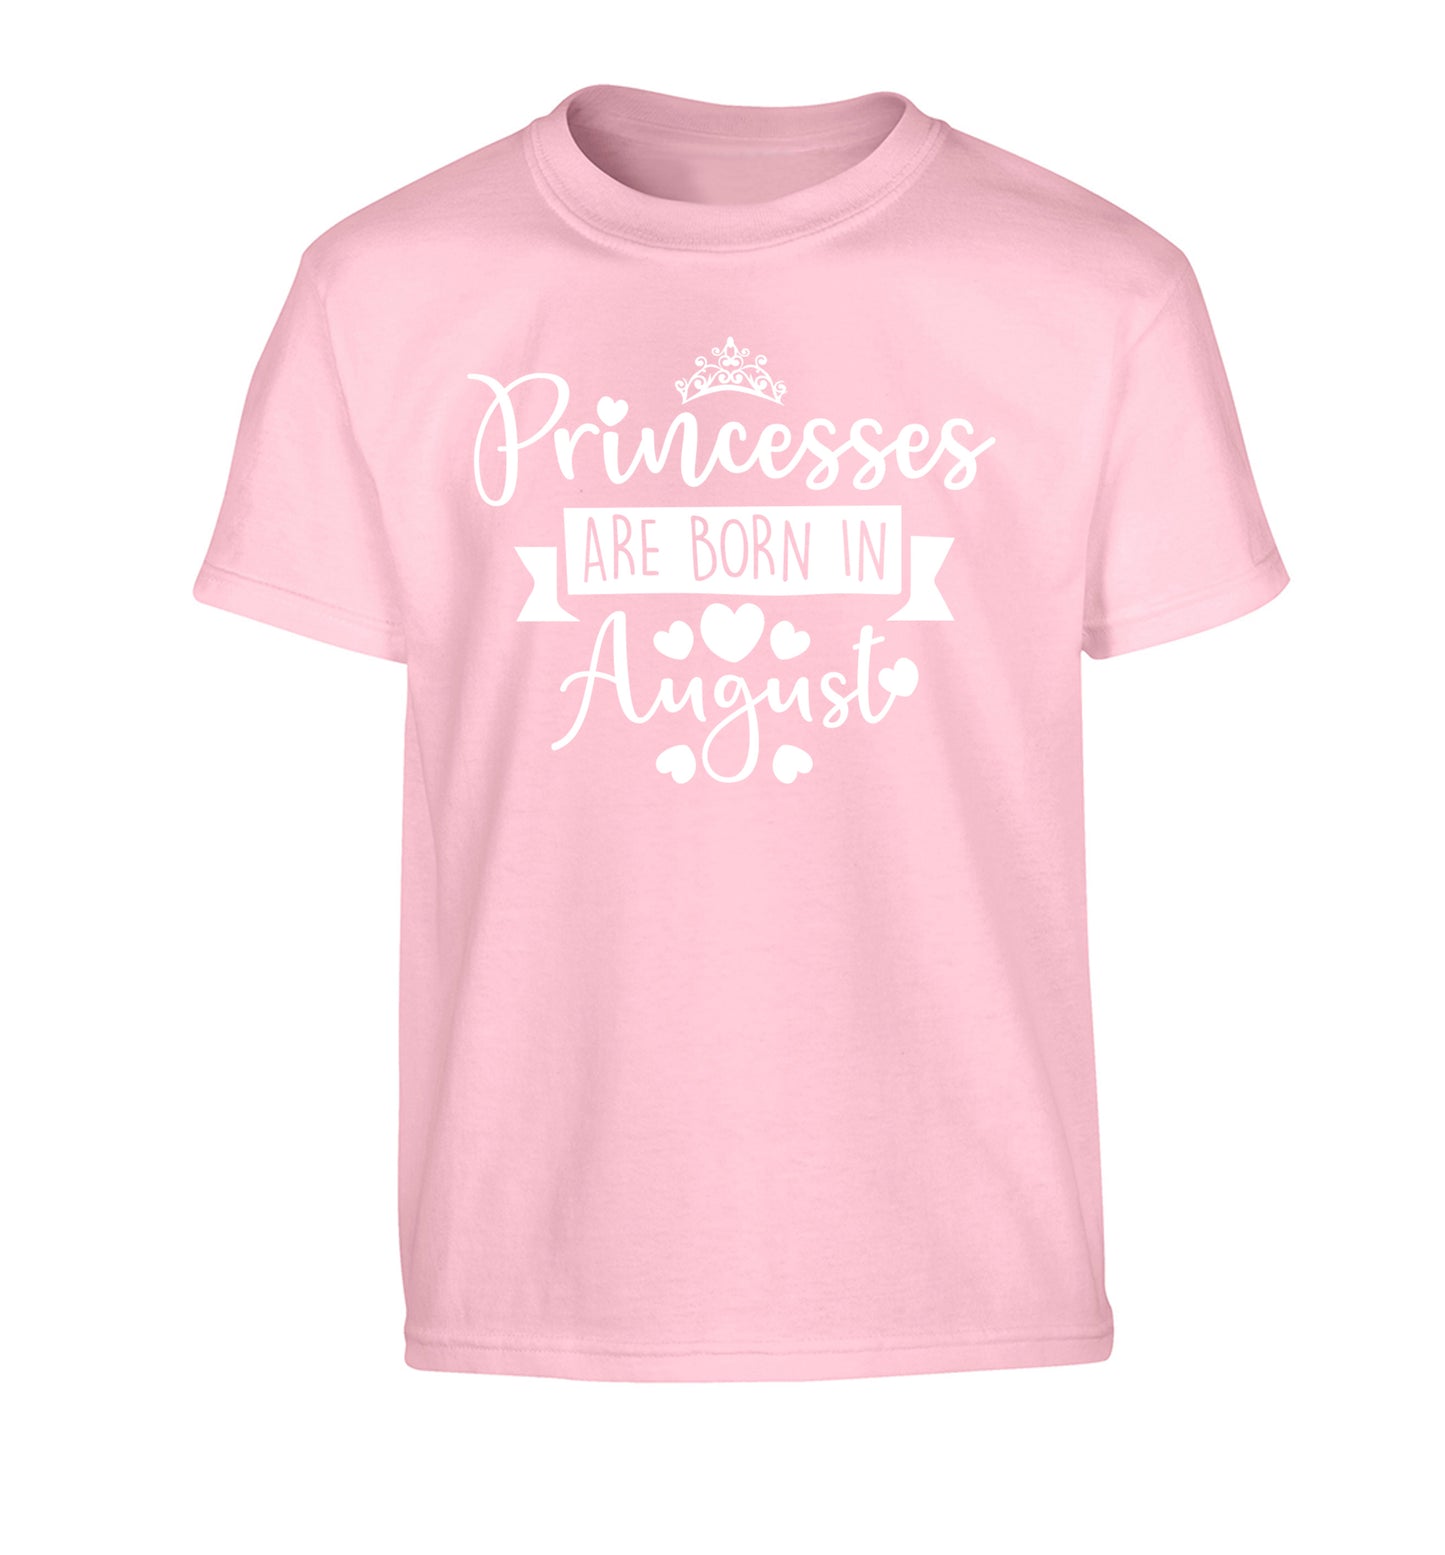 Princesses are born in August Children's light pink Tshirt 12-13 Years